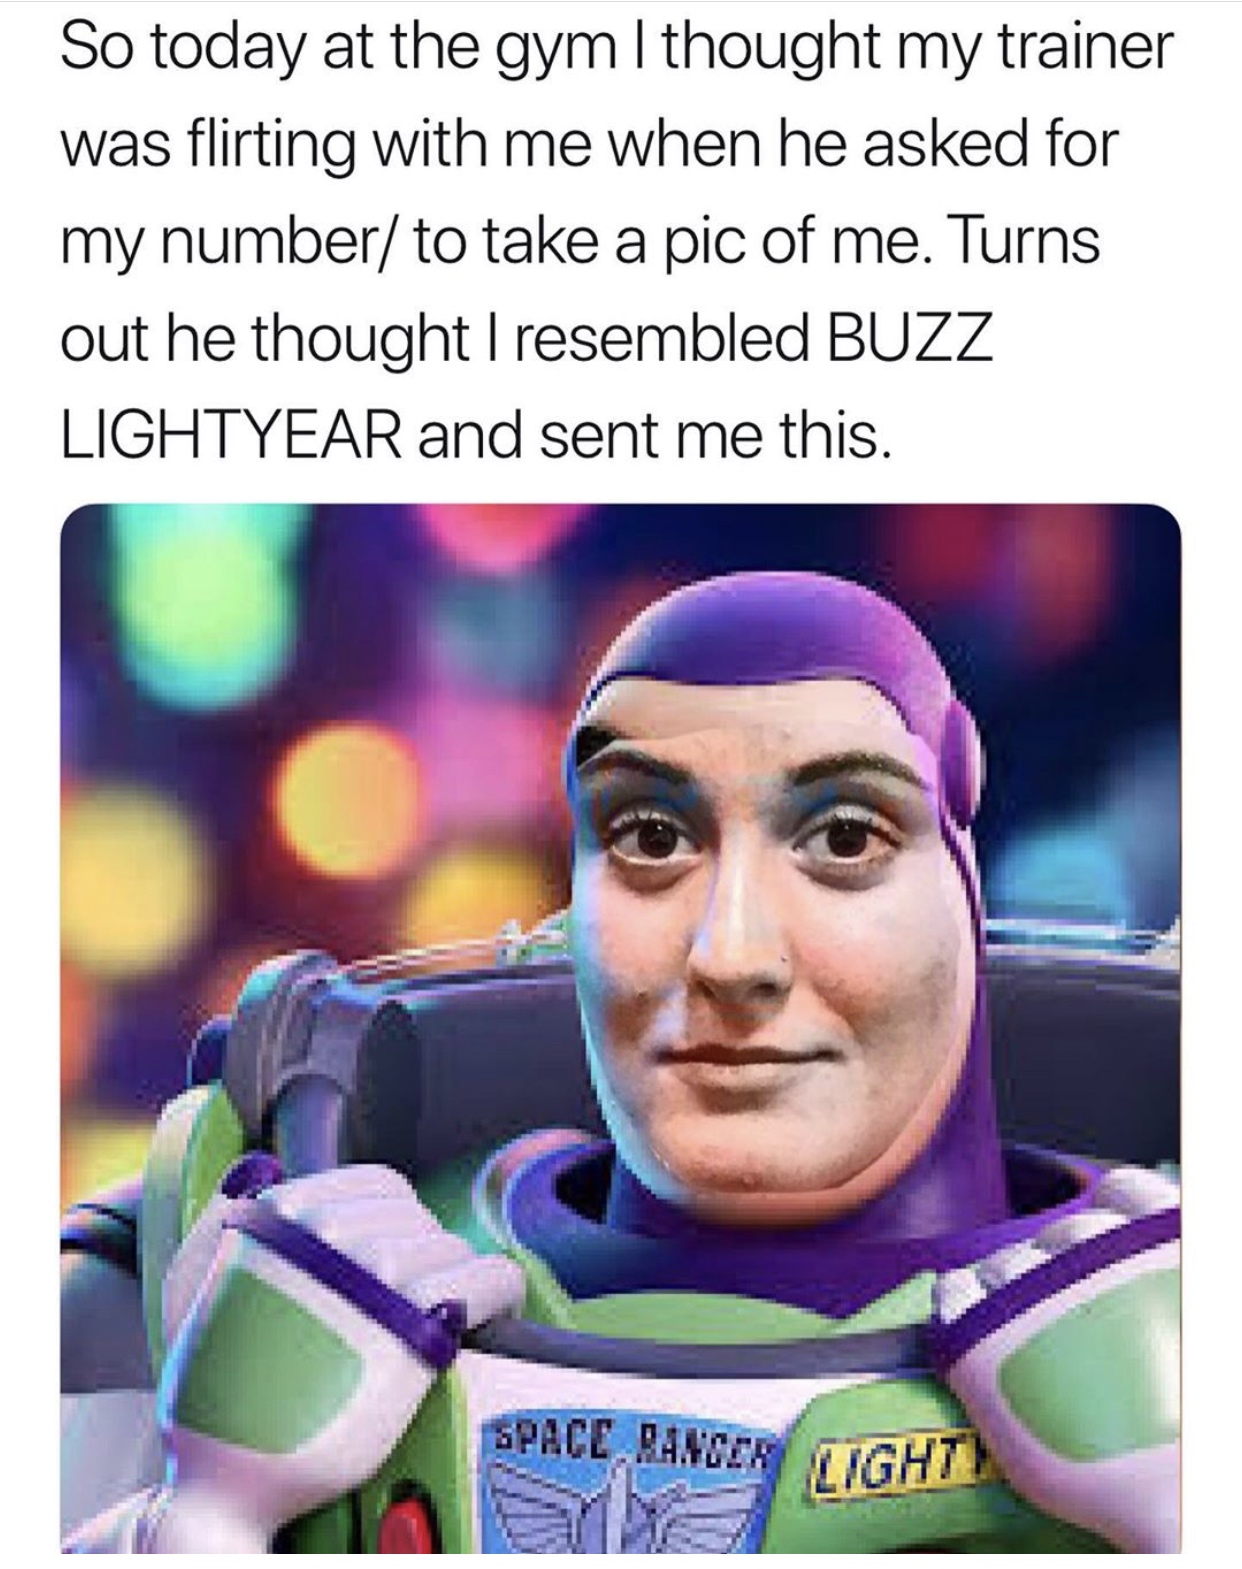 Buzz Lightyear - So today at the gym I thought my trainer was flirting with me when he asked for my number to take a pic of me. Turns out he thought I resembled Buzz Lightyear and sent me this. Space Ranger be Light